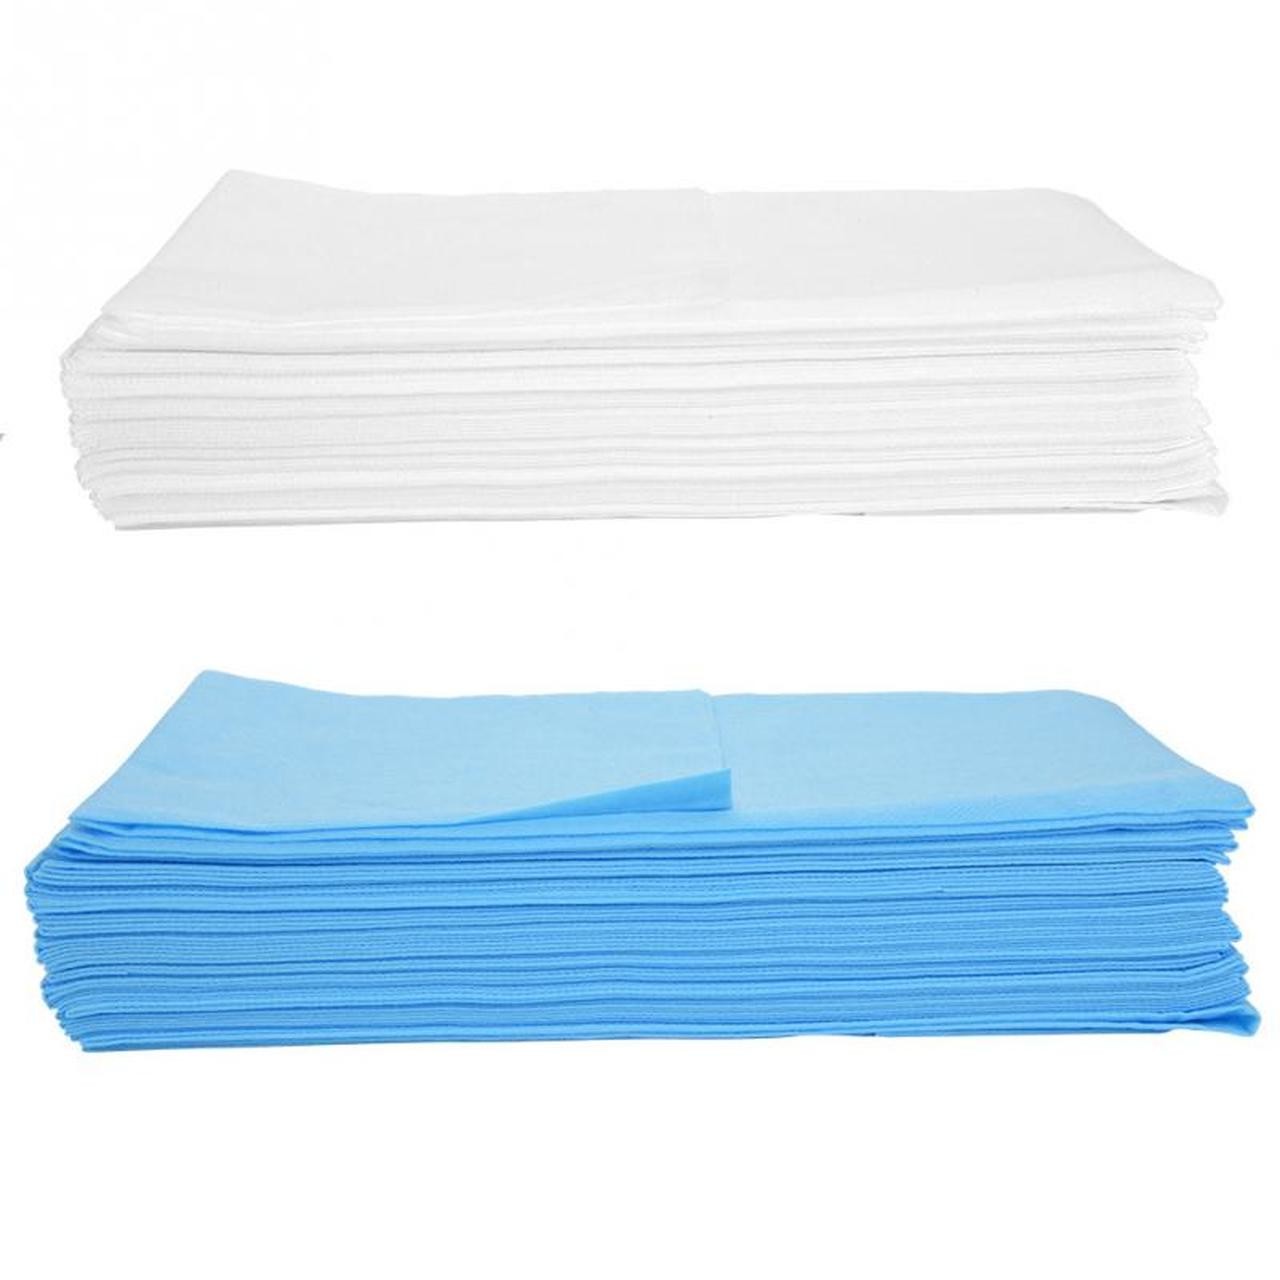  20gsm Disposable Bed Cover Roll Manufactures